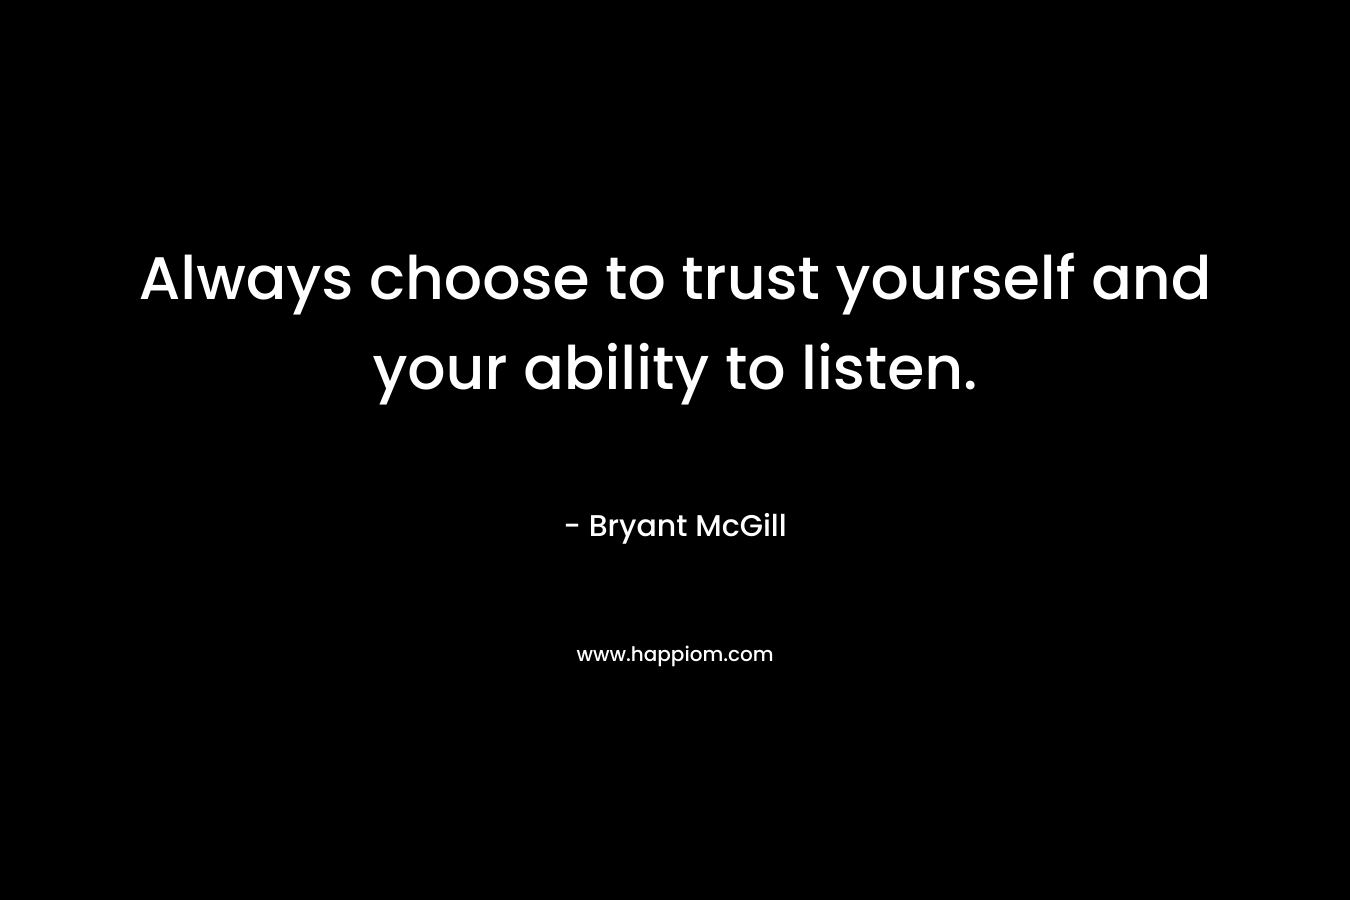 Always choose to trust yourself and your ability to listen.